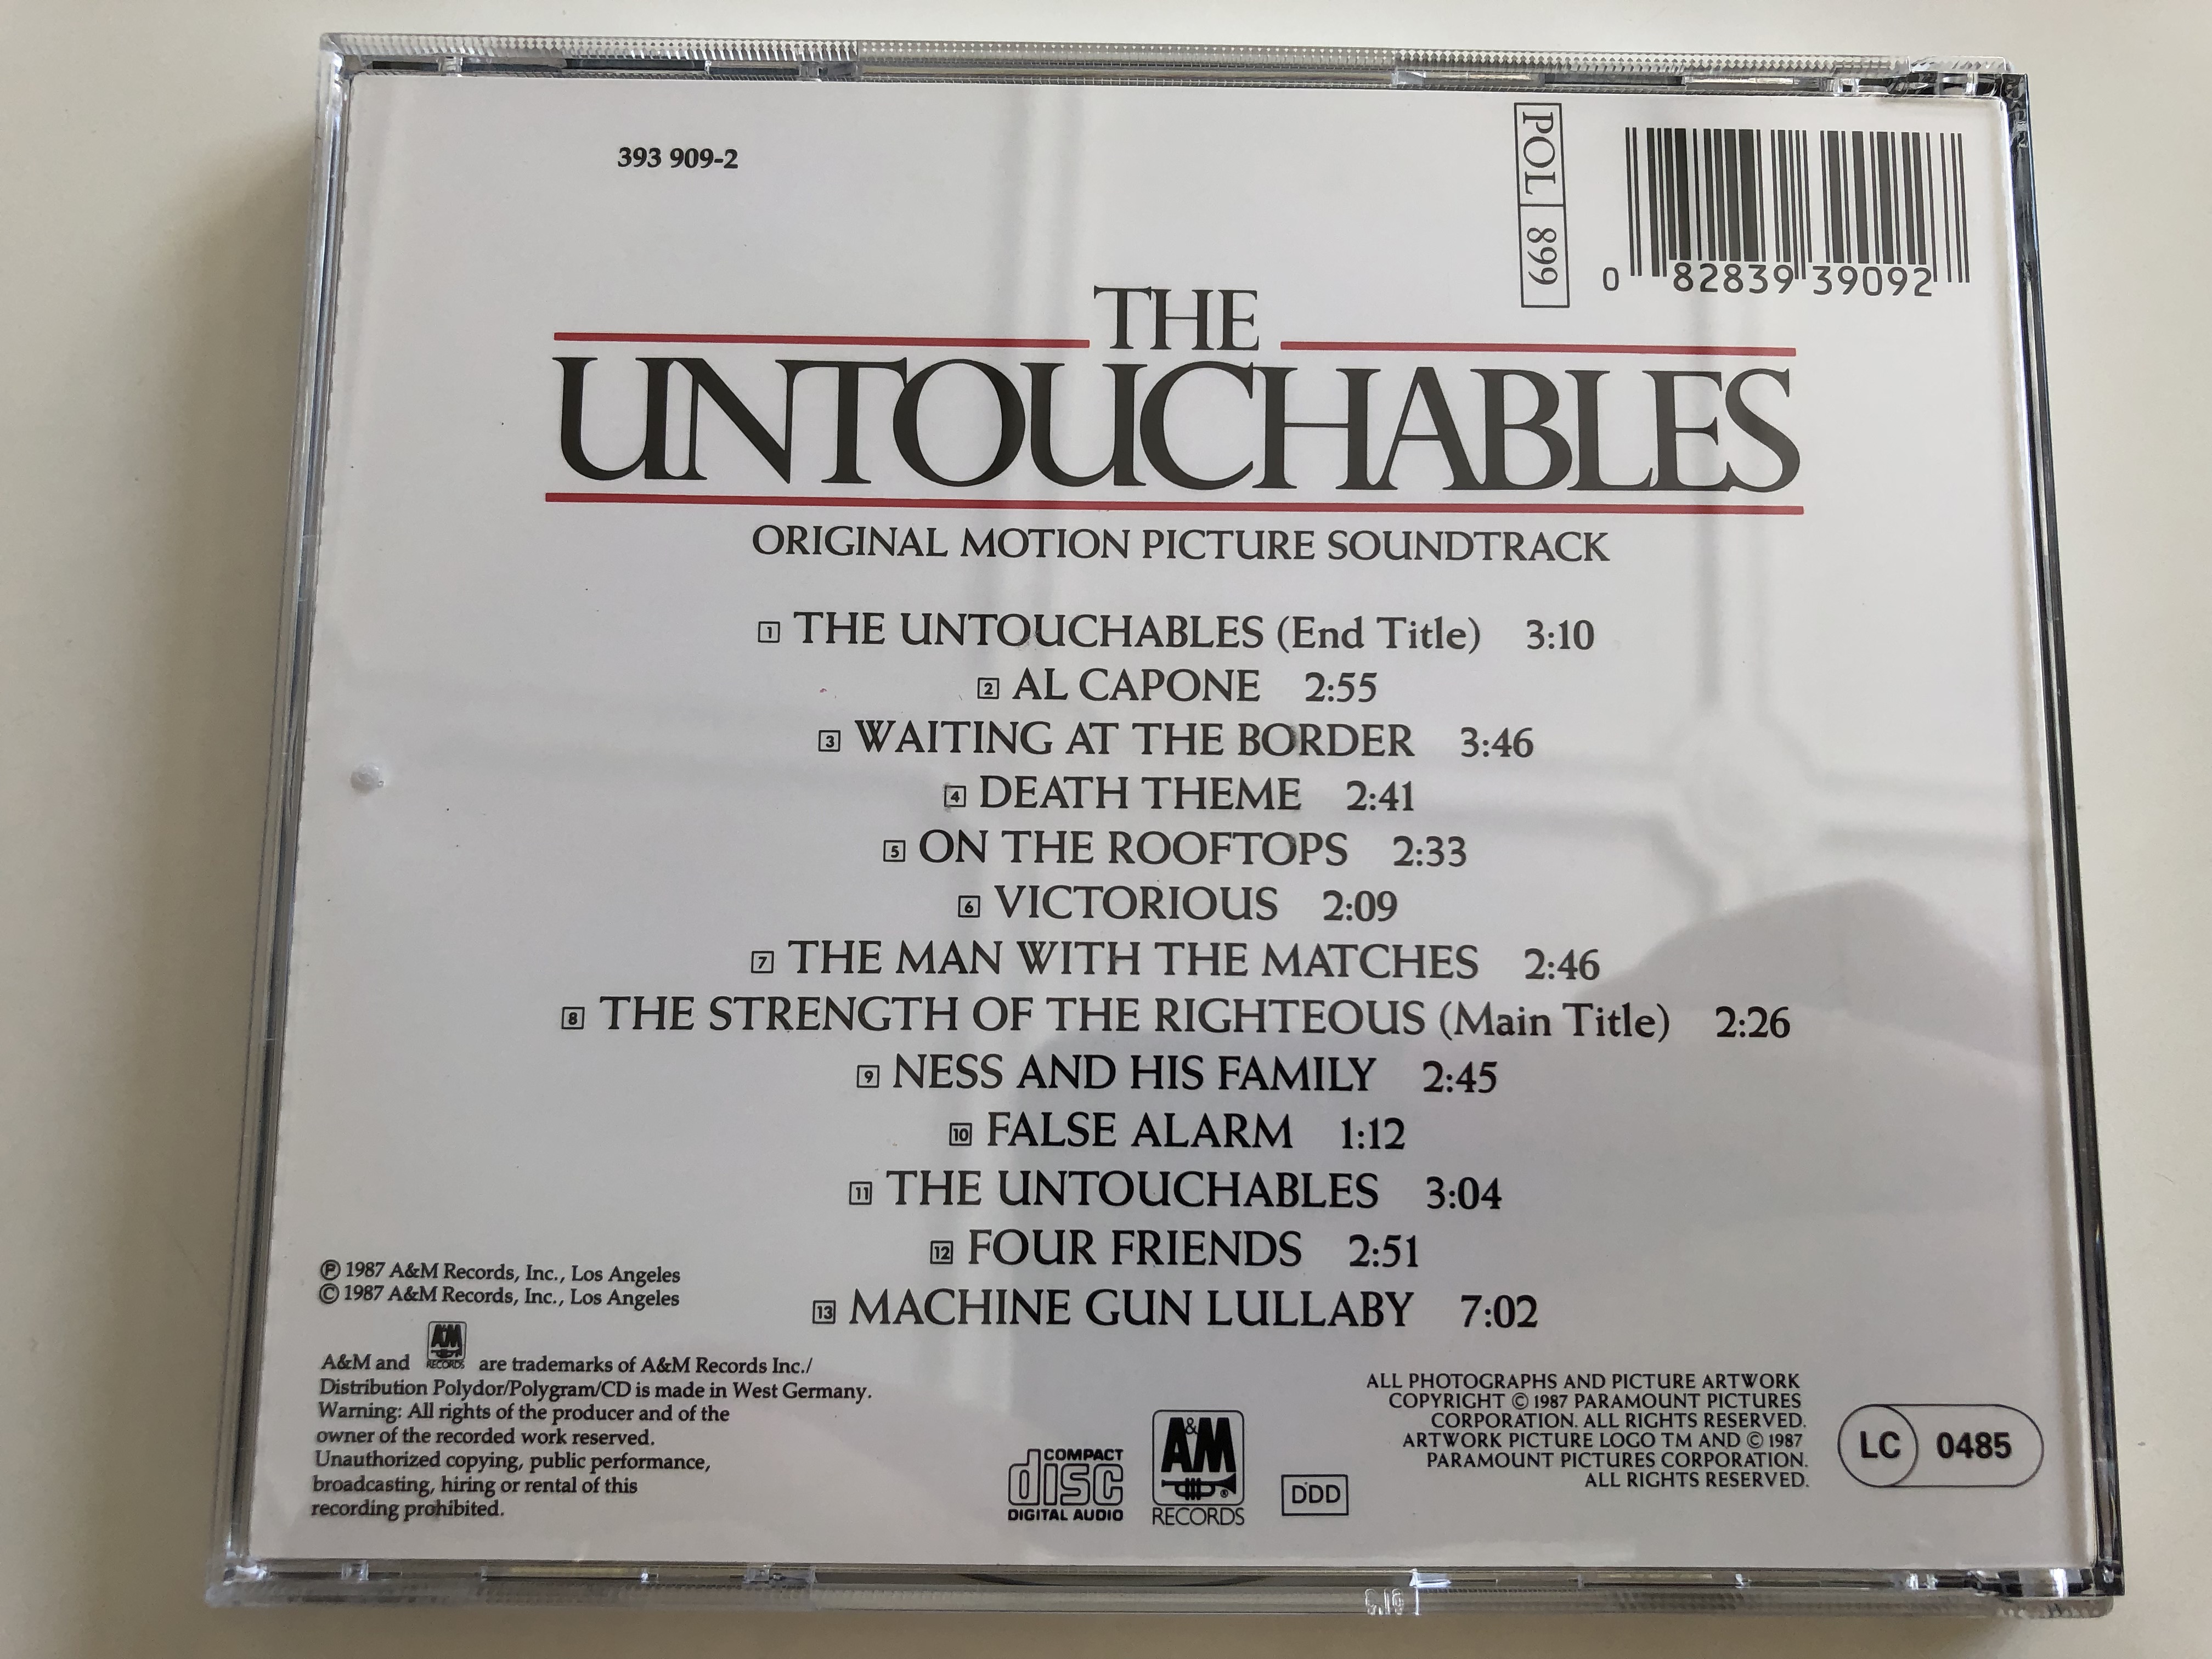 the-untouchables-original-motion-picture-soundtrack-music-composed-orchestrated-conducted-by-ennio-morricone-audio-cd-1987-a-m-records-393-909-2-6-.jpg